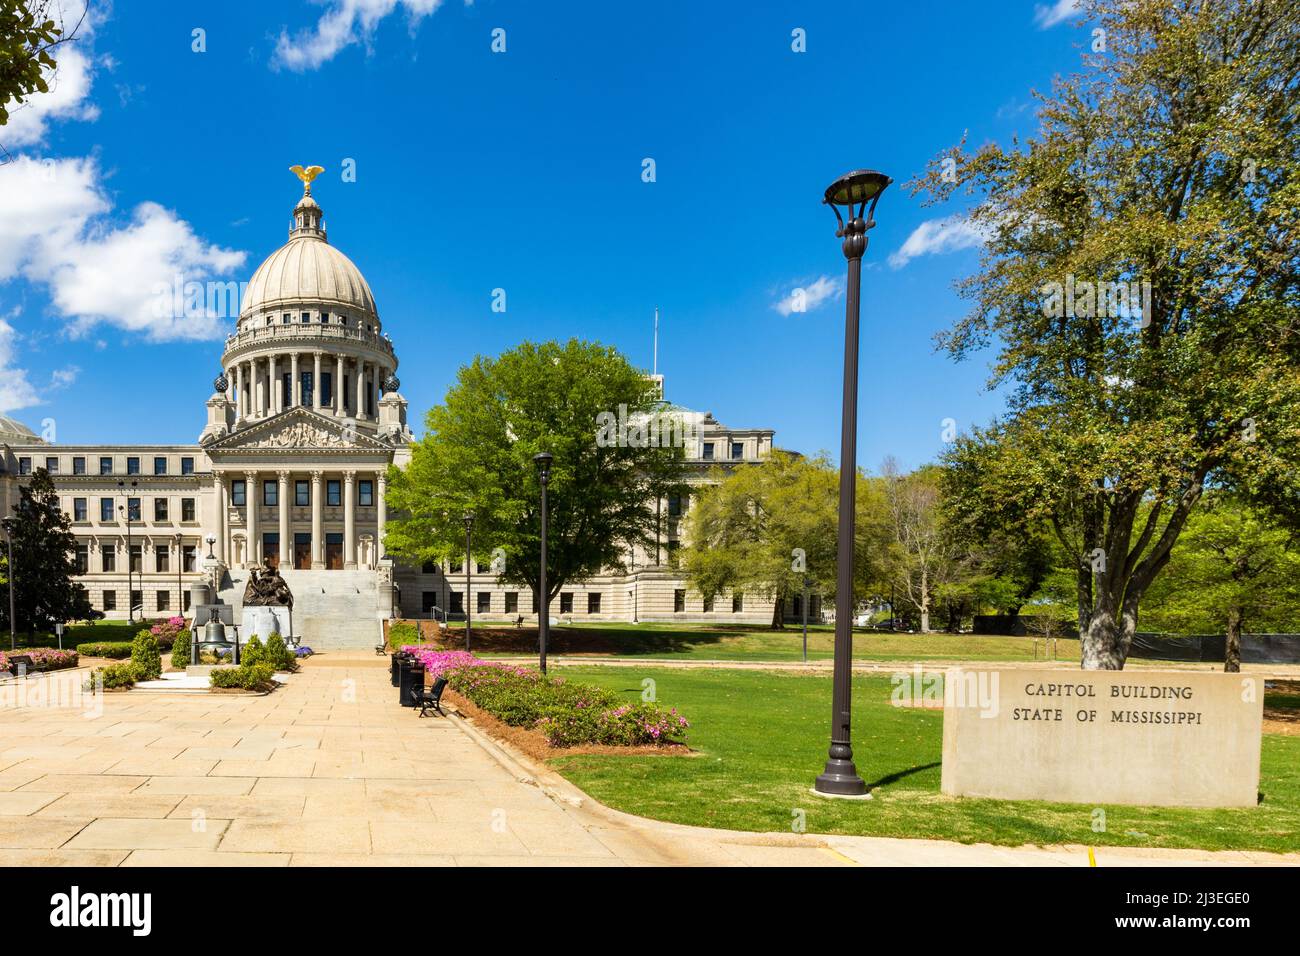 Jackson, MS - April 7, 2022: The Mississippi Capitol Building in Jackson, MS Stock Photo